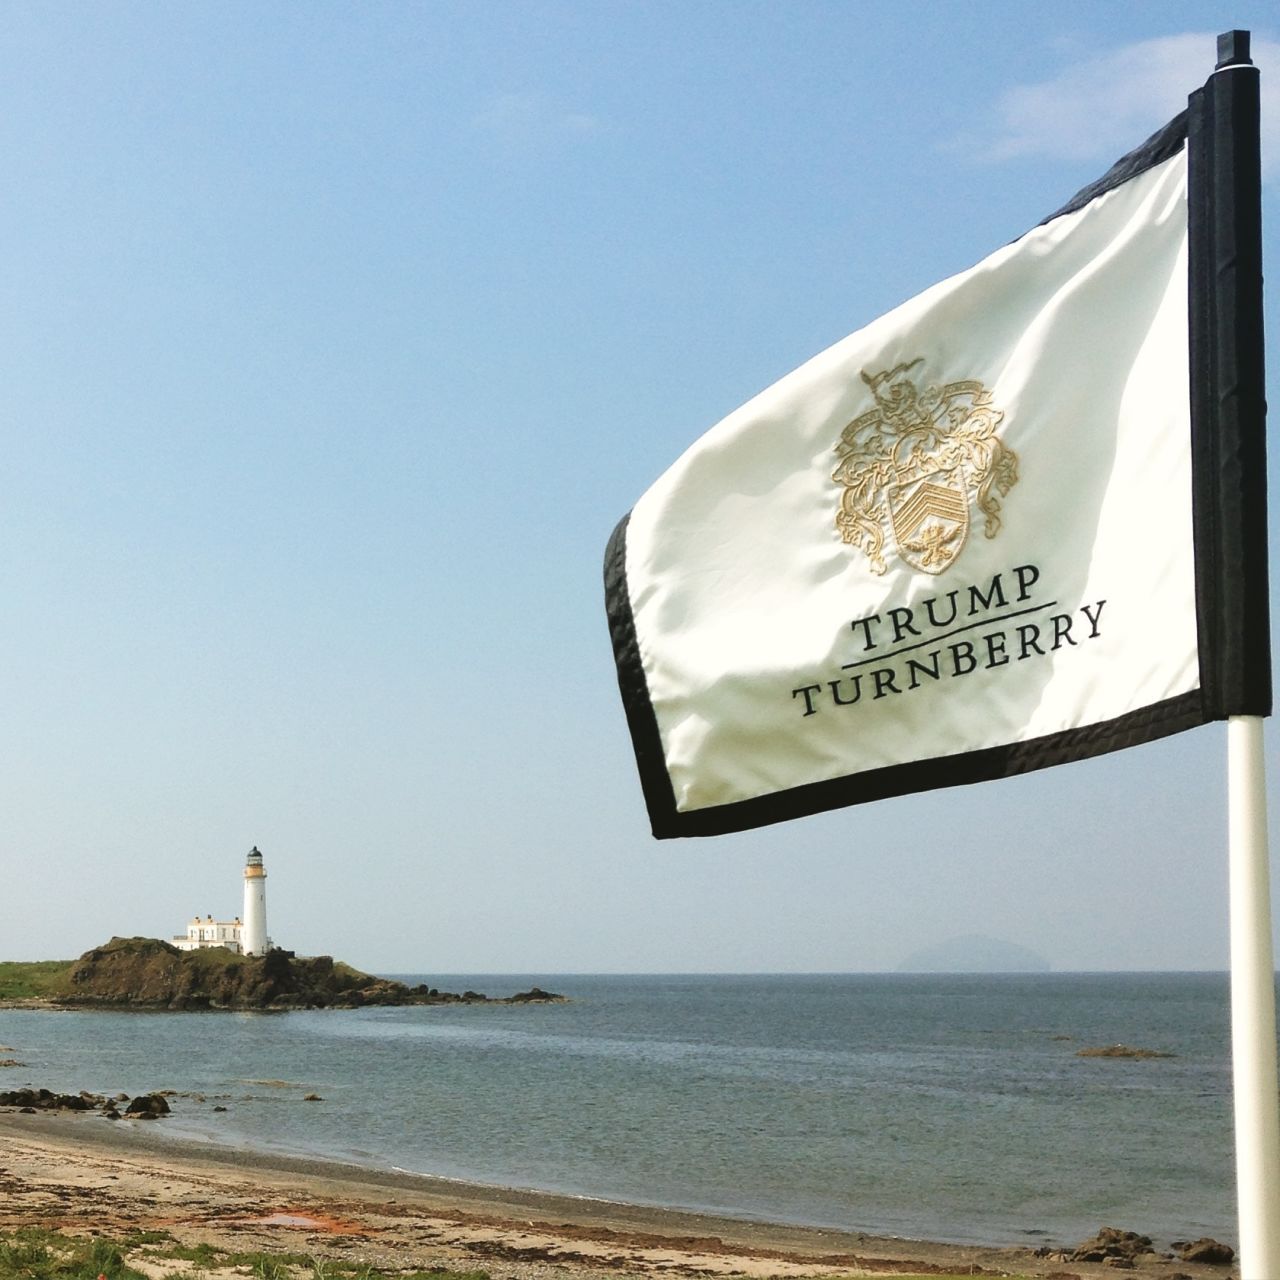 Donald Trump has set aside £200 million ($287 million) to restore and upgrade Turnberry's golf facilities, hotel and spa.